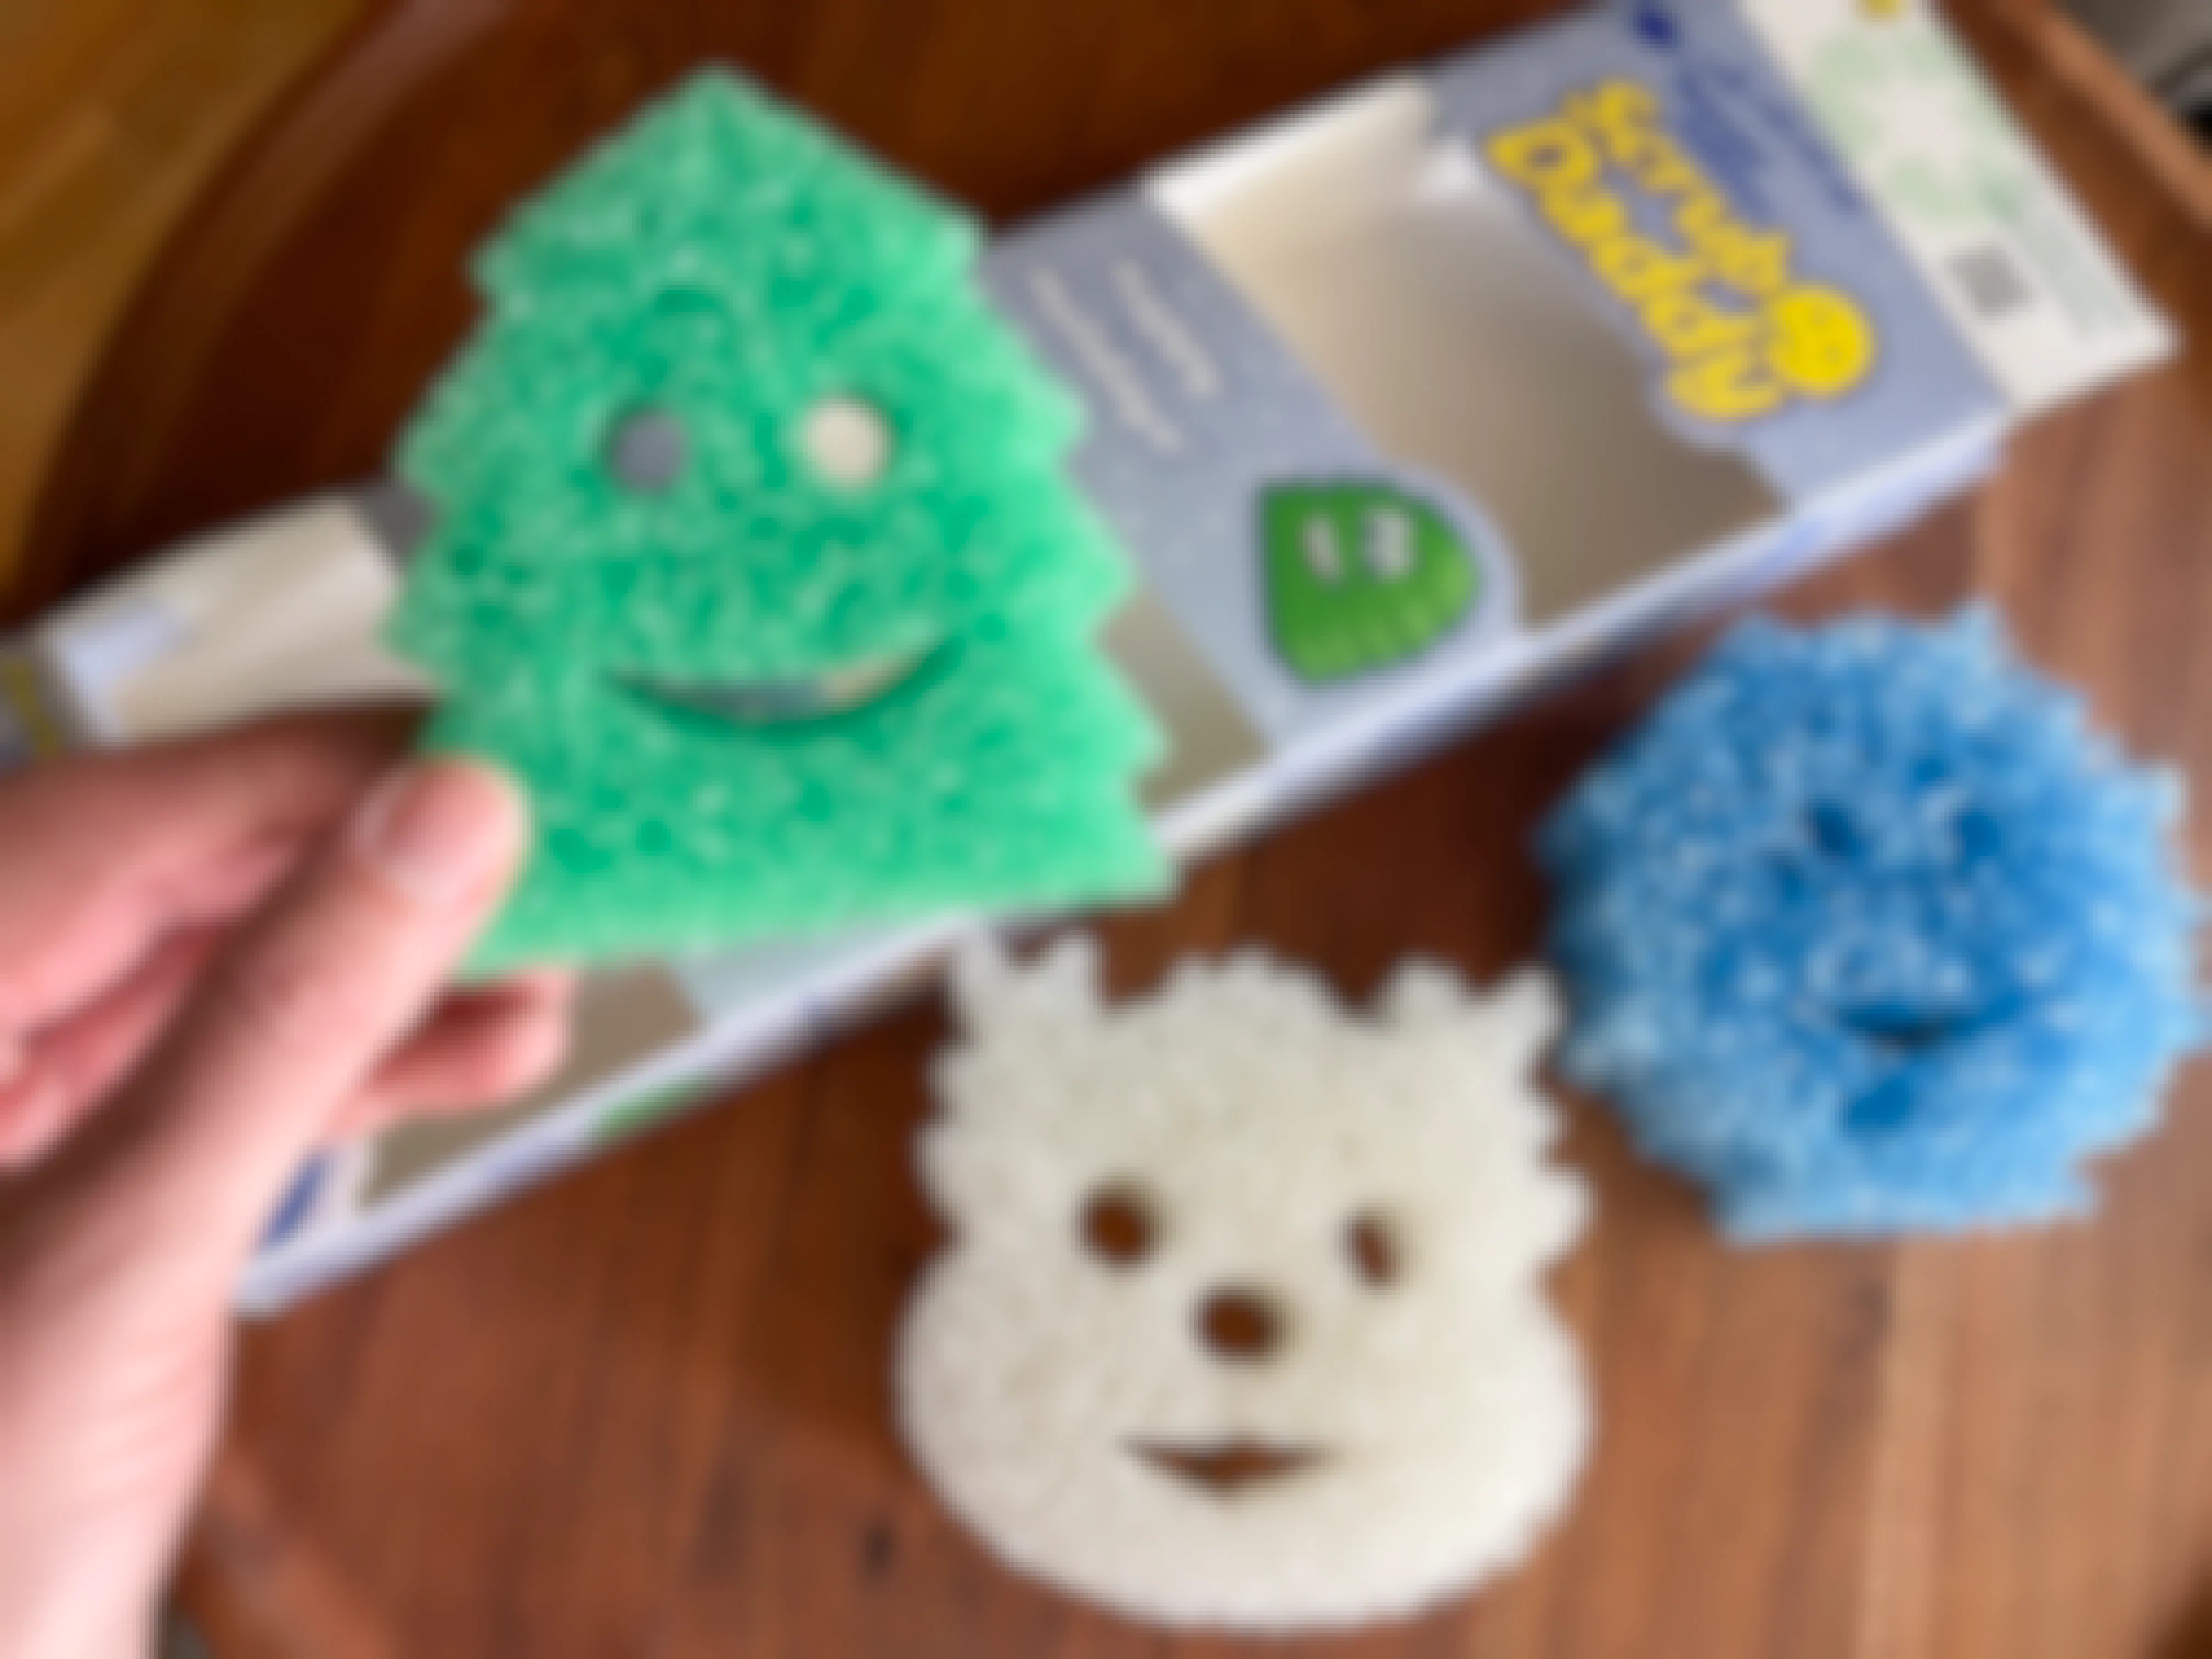 The Holiday Scrub Daddy Sponges Are Stocking Stuffers People Actually Want